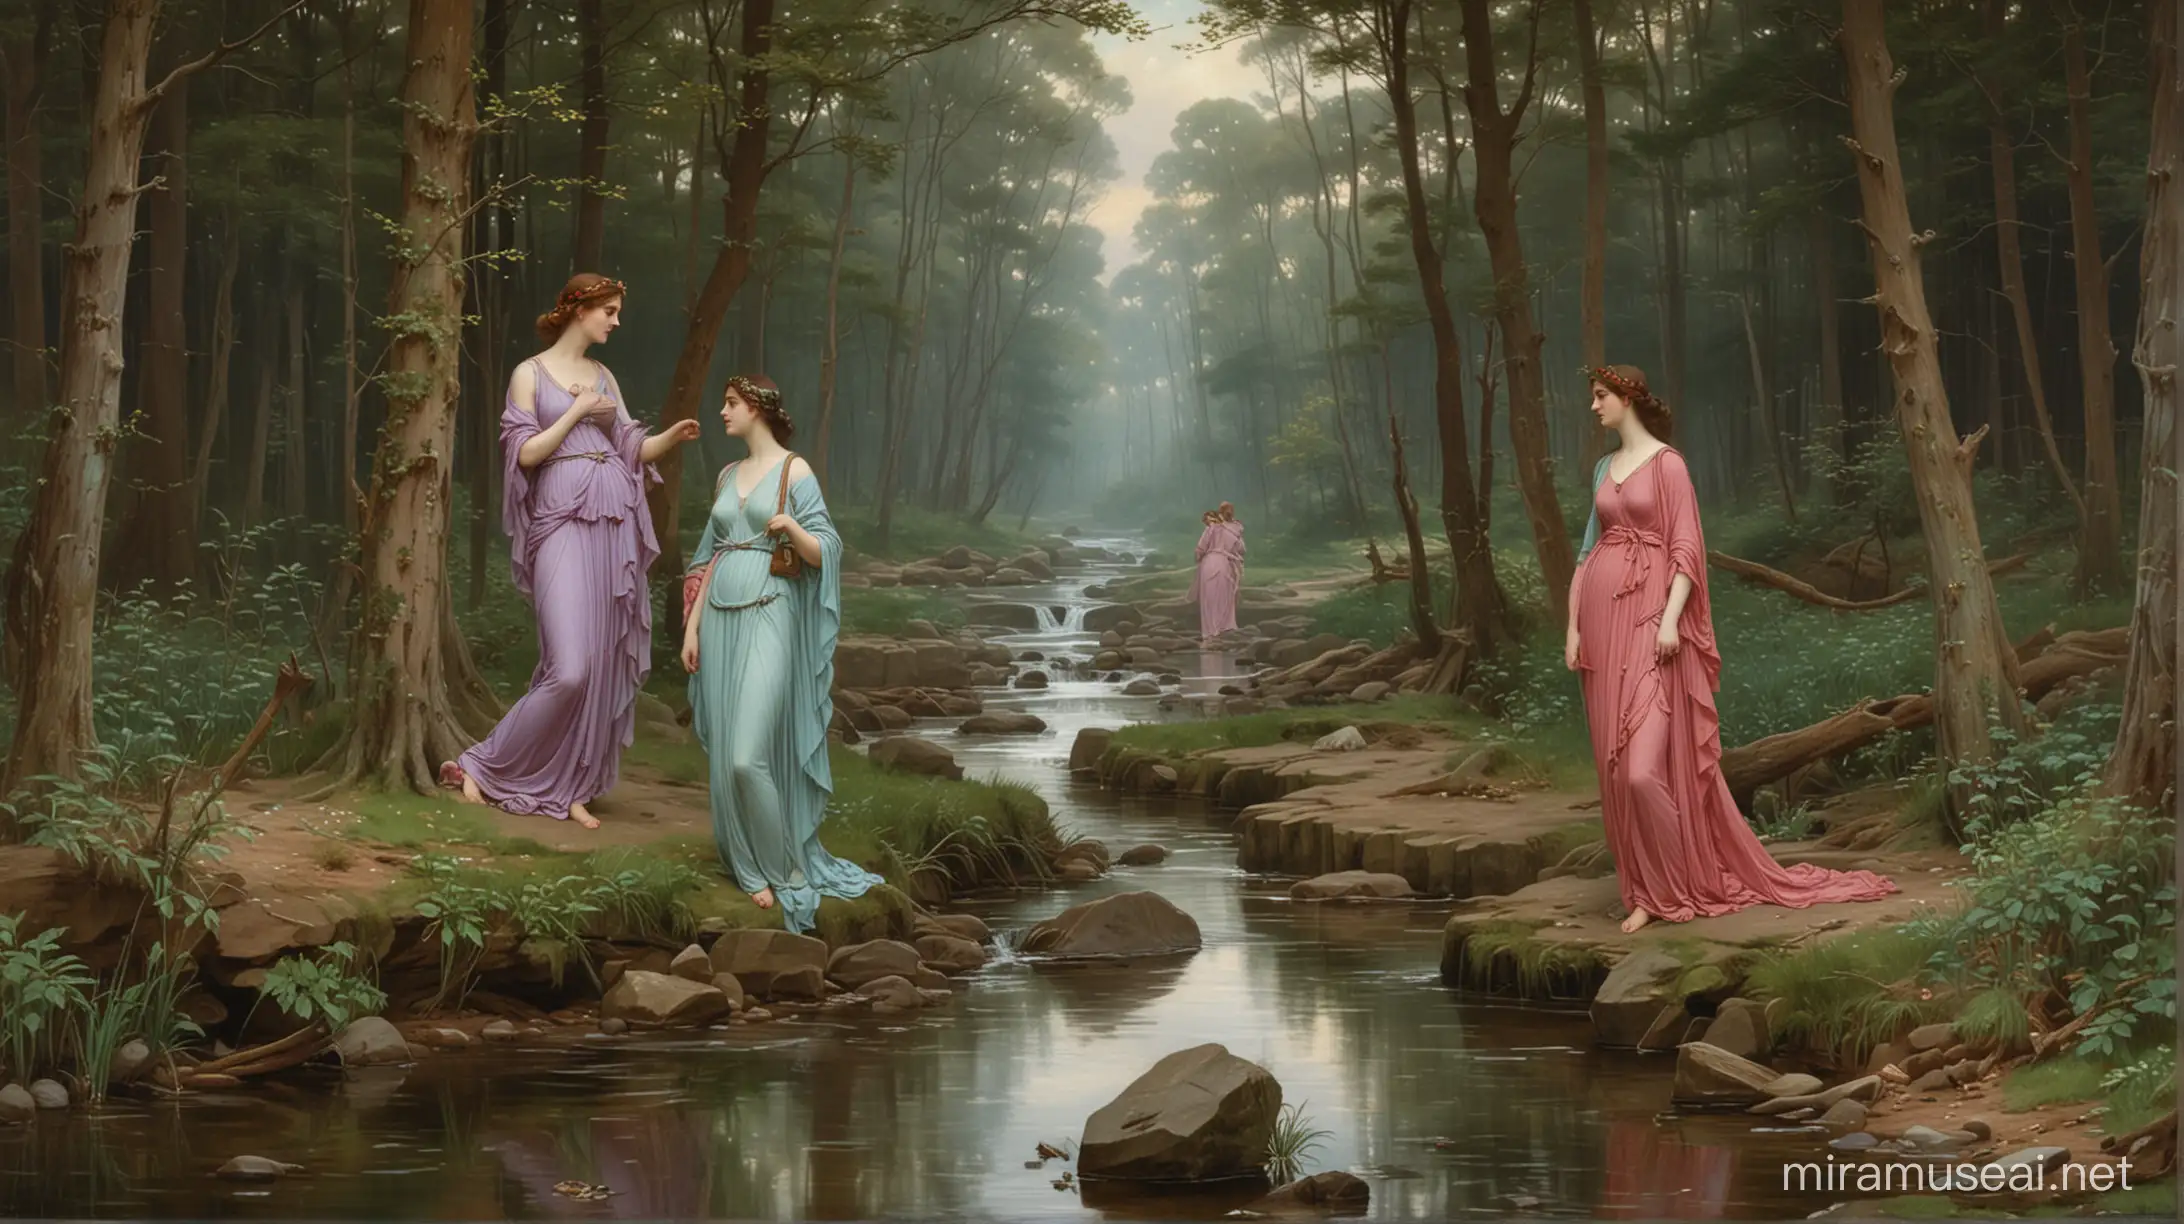 Three Muses in an Enchanted Forest by a Serene Stream